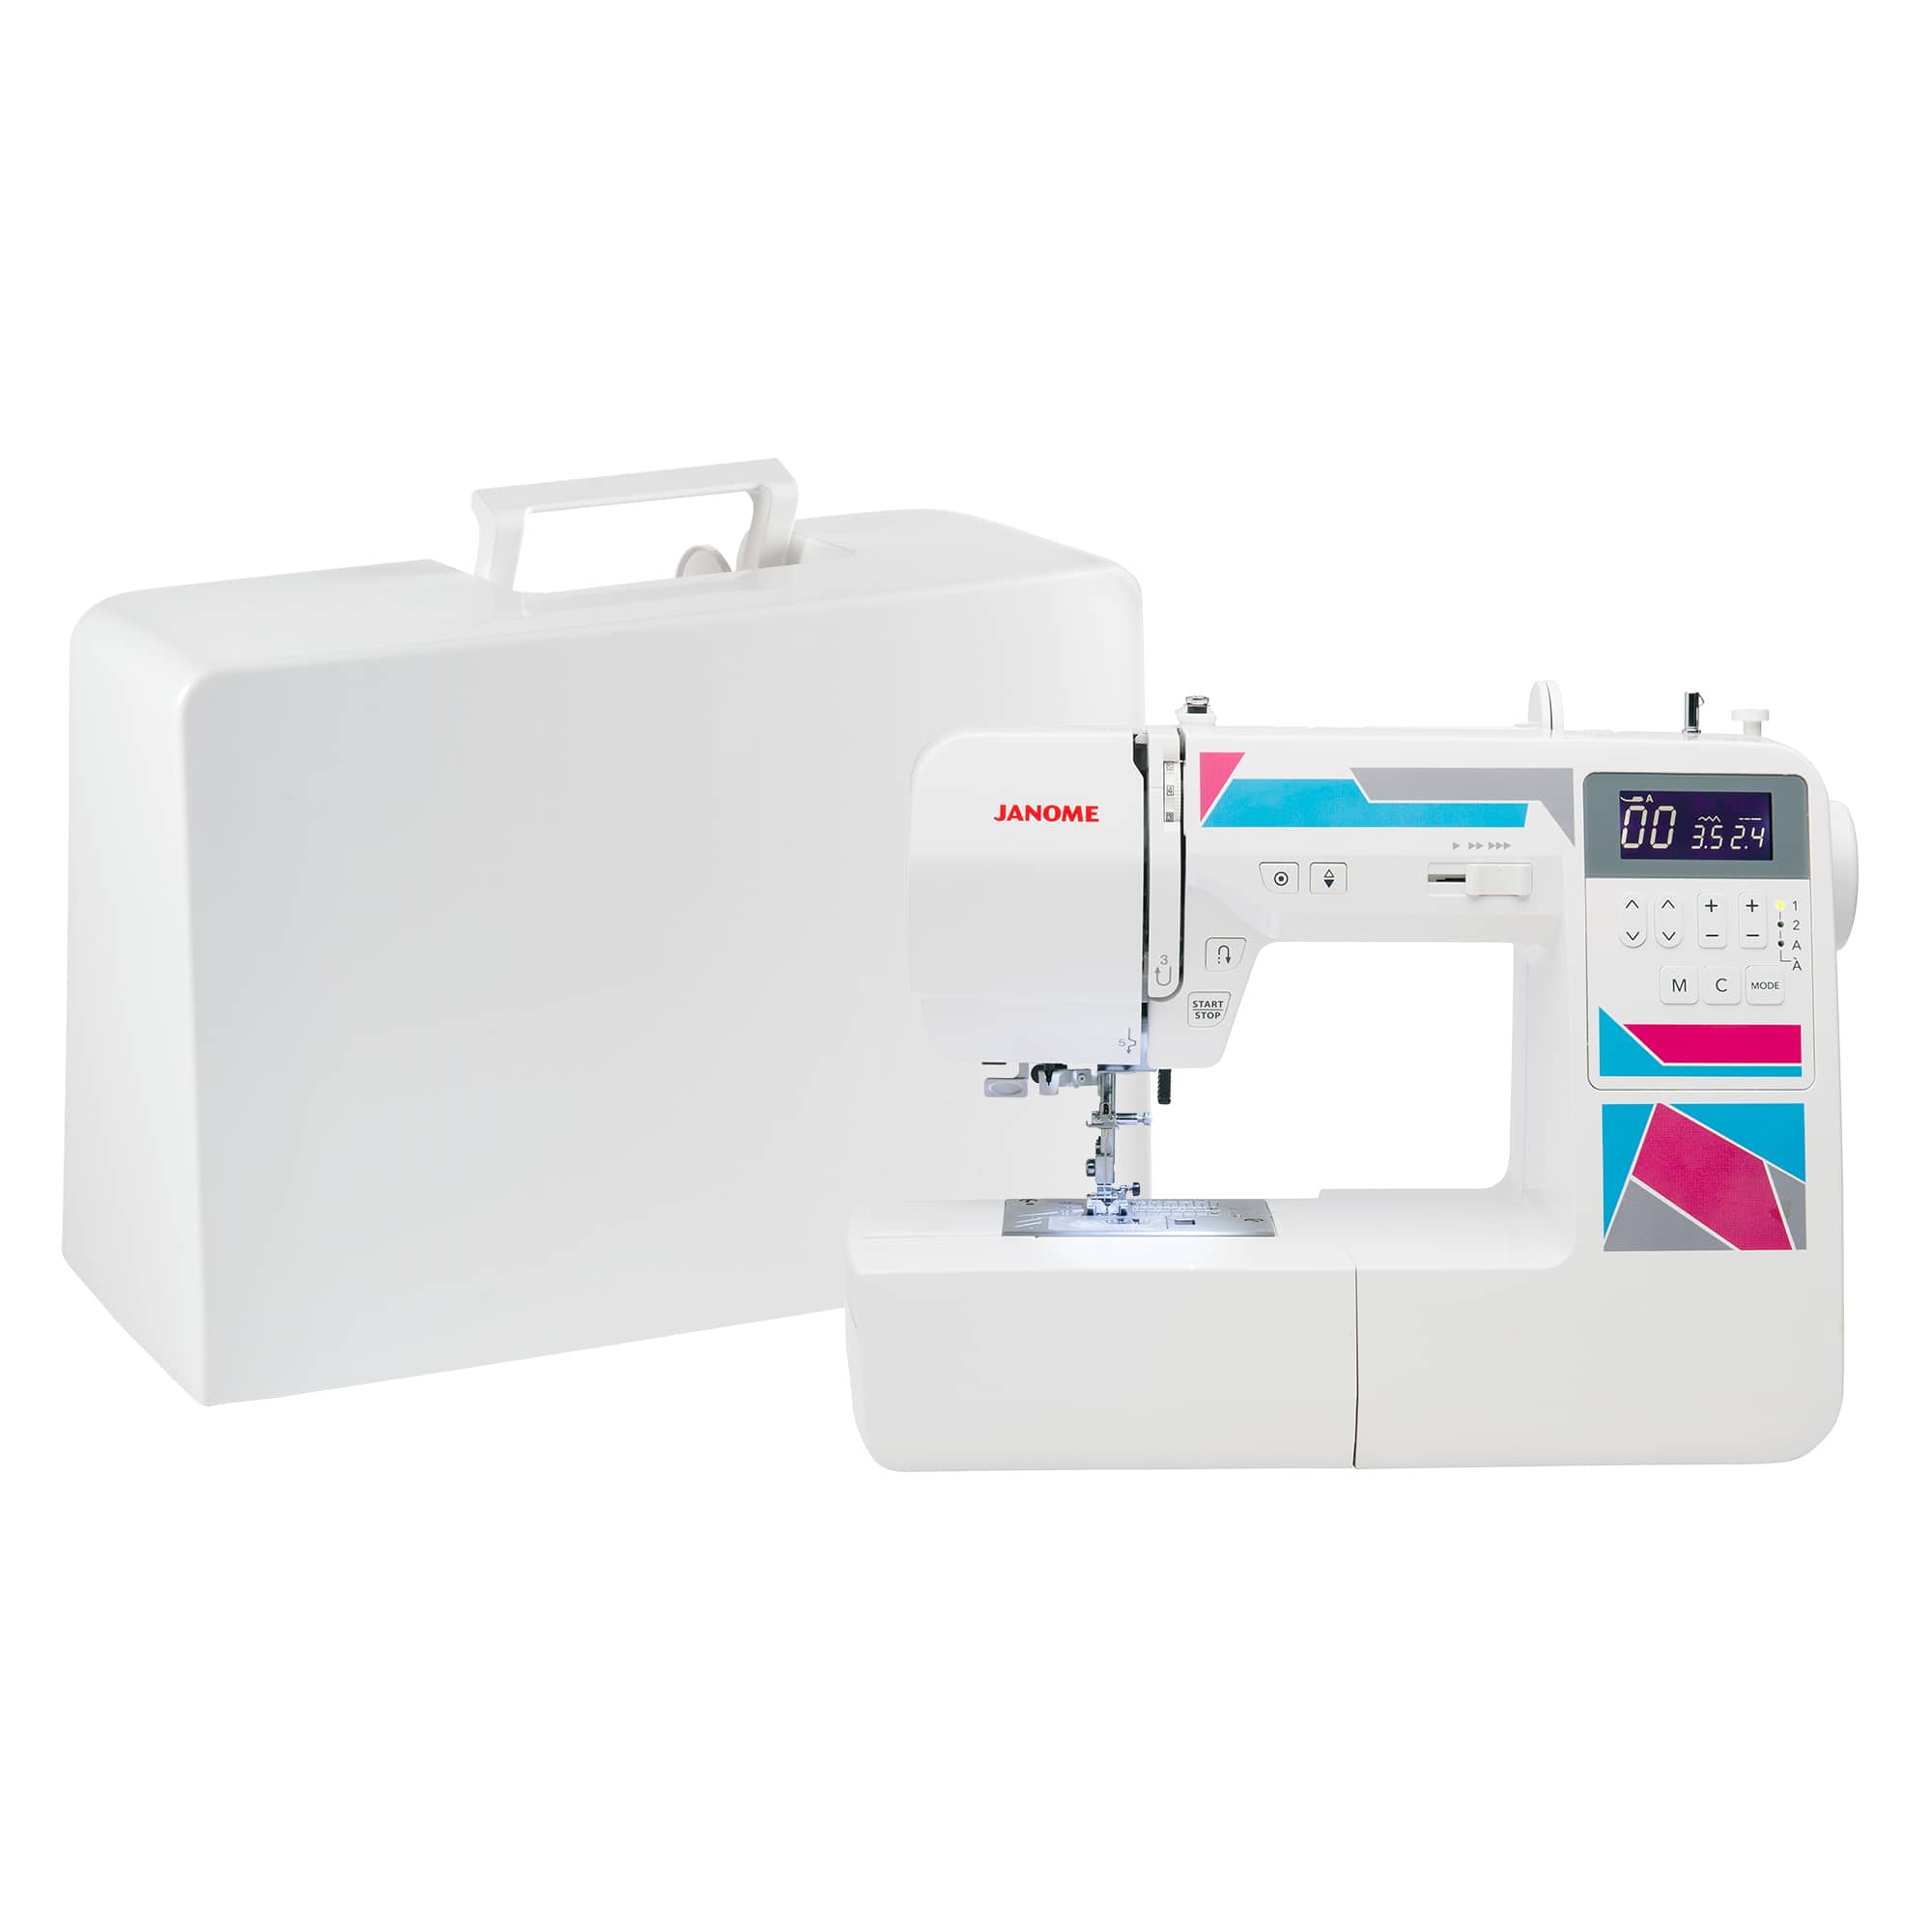 Hello Kitty Sewing Machine by Janome: Tool Review